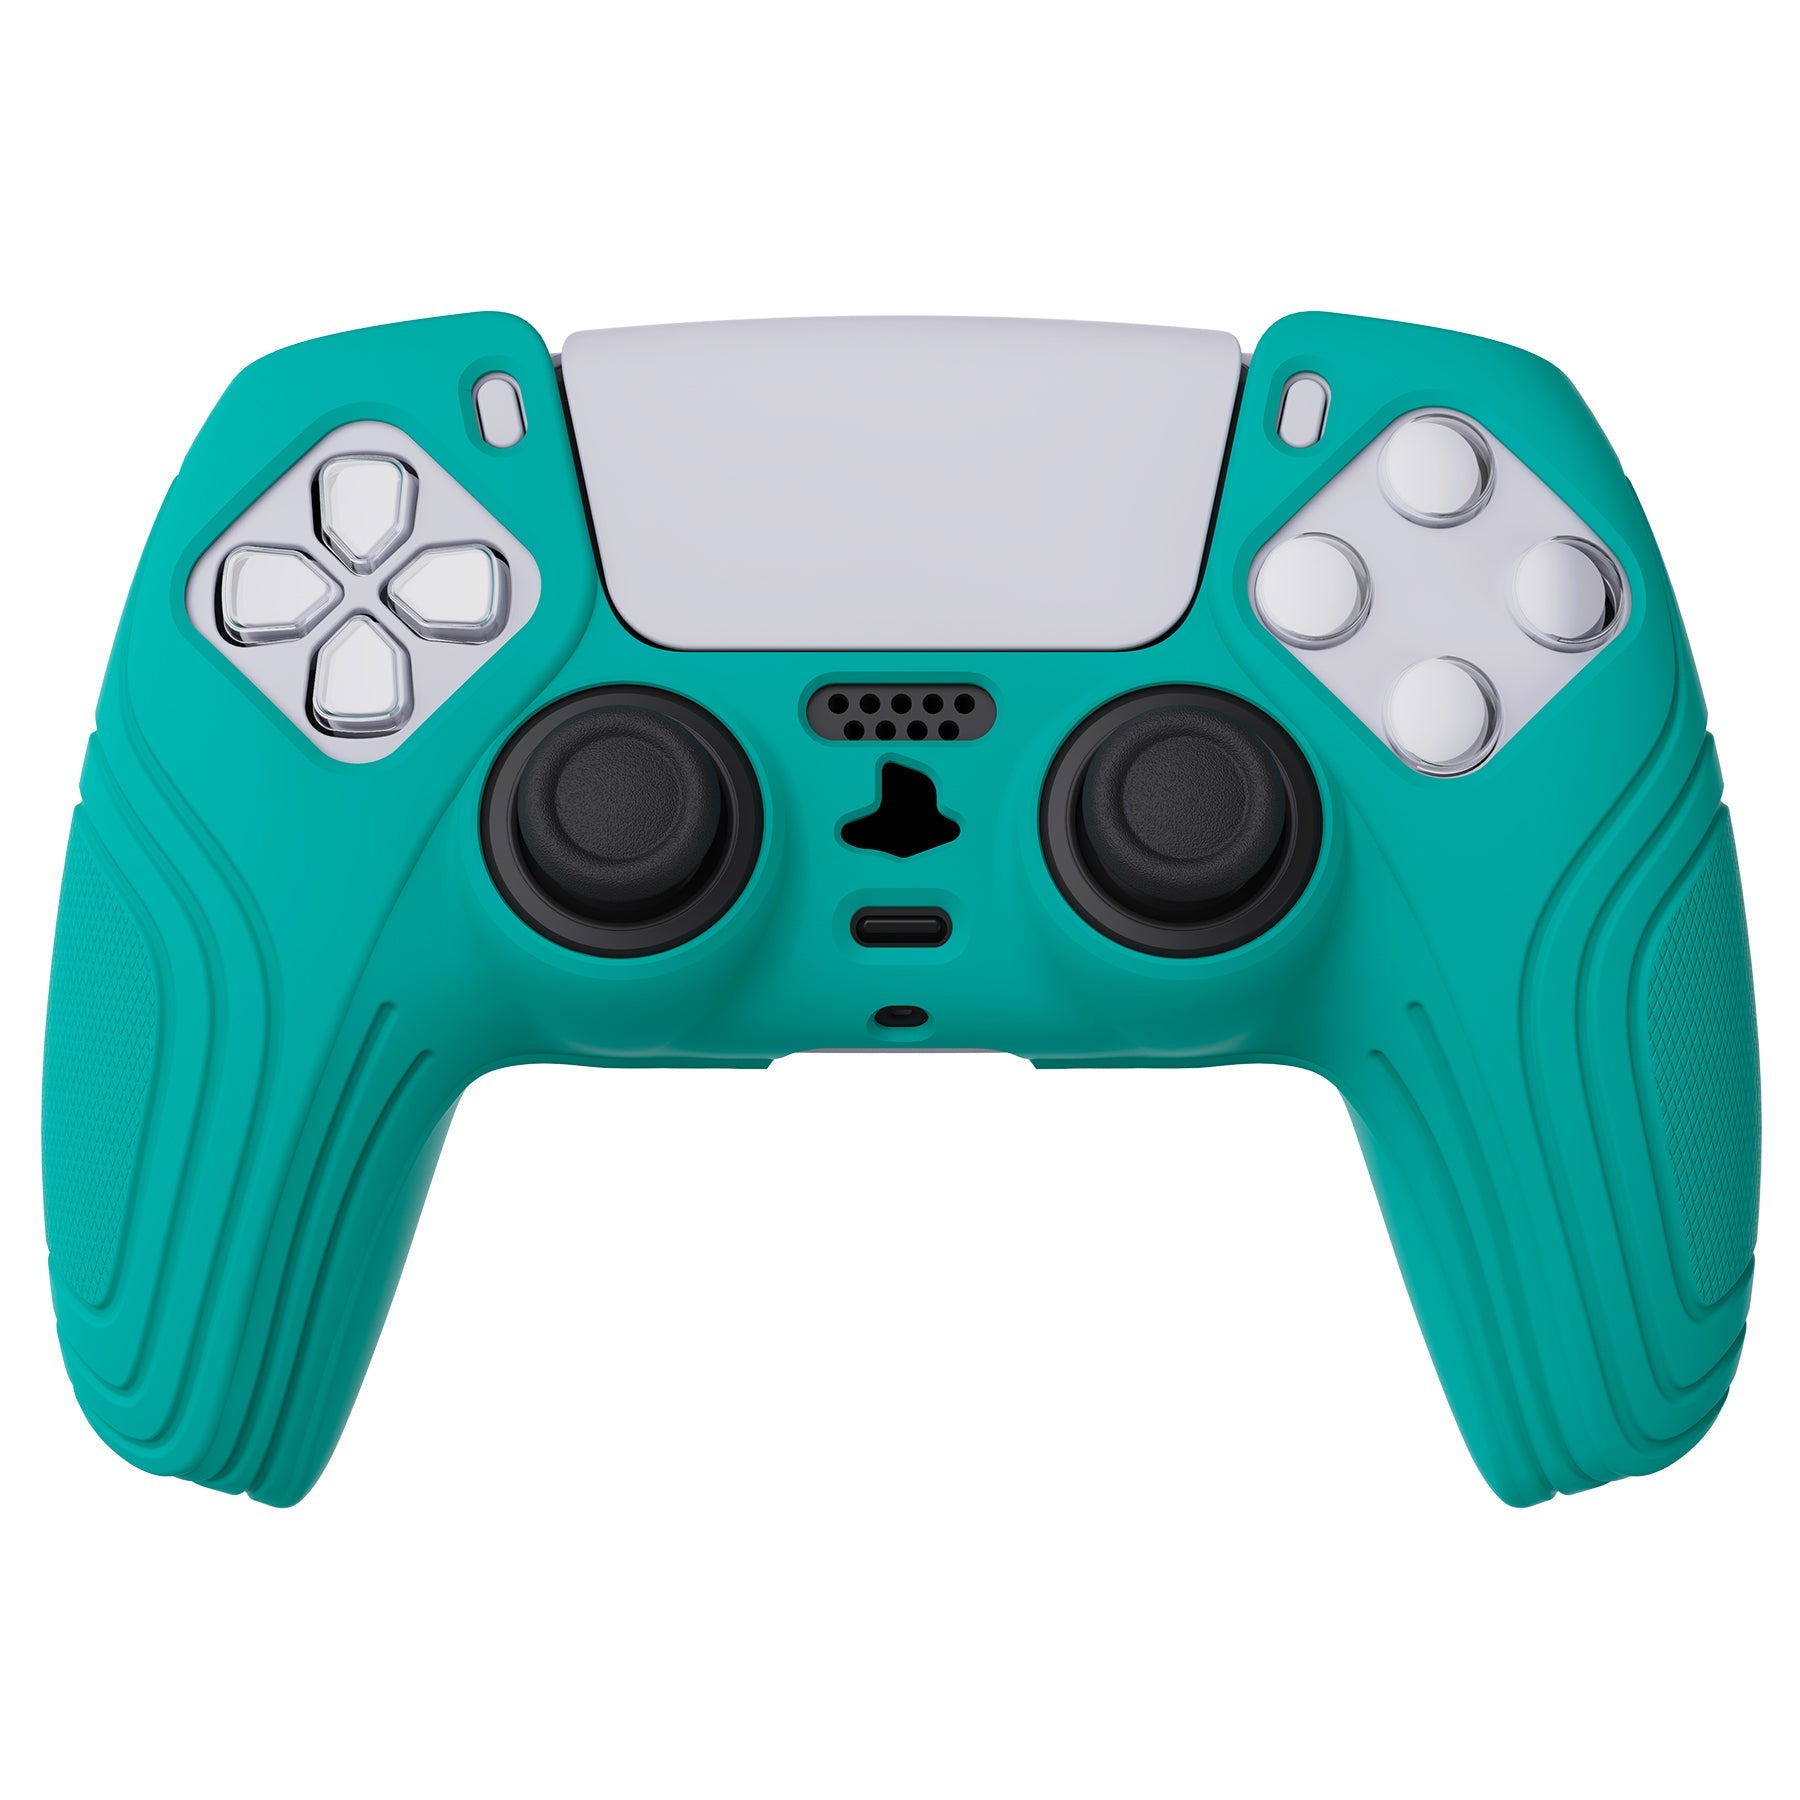 PlayVital Samurai Edition Aqua Green Anti-slip Controller Grip Silicone Skin, Ergonomic Soft Rubber Protective Case Cover for PlayStation 5 PS5 Controller with Black Thumb Stick Caps - BWPF010 PlayVital